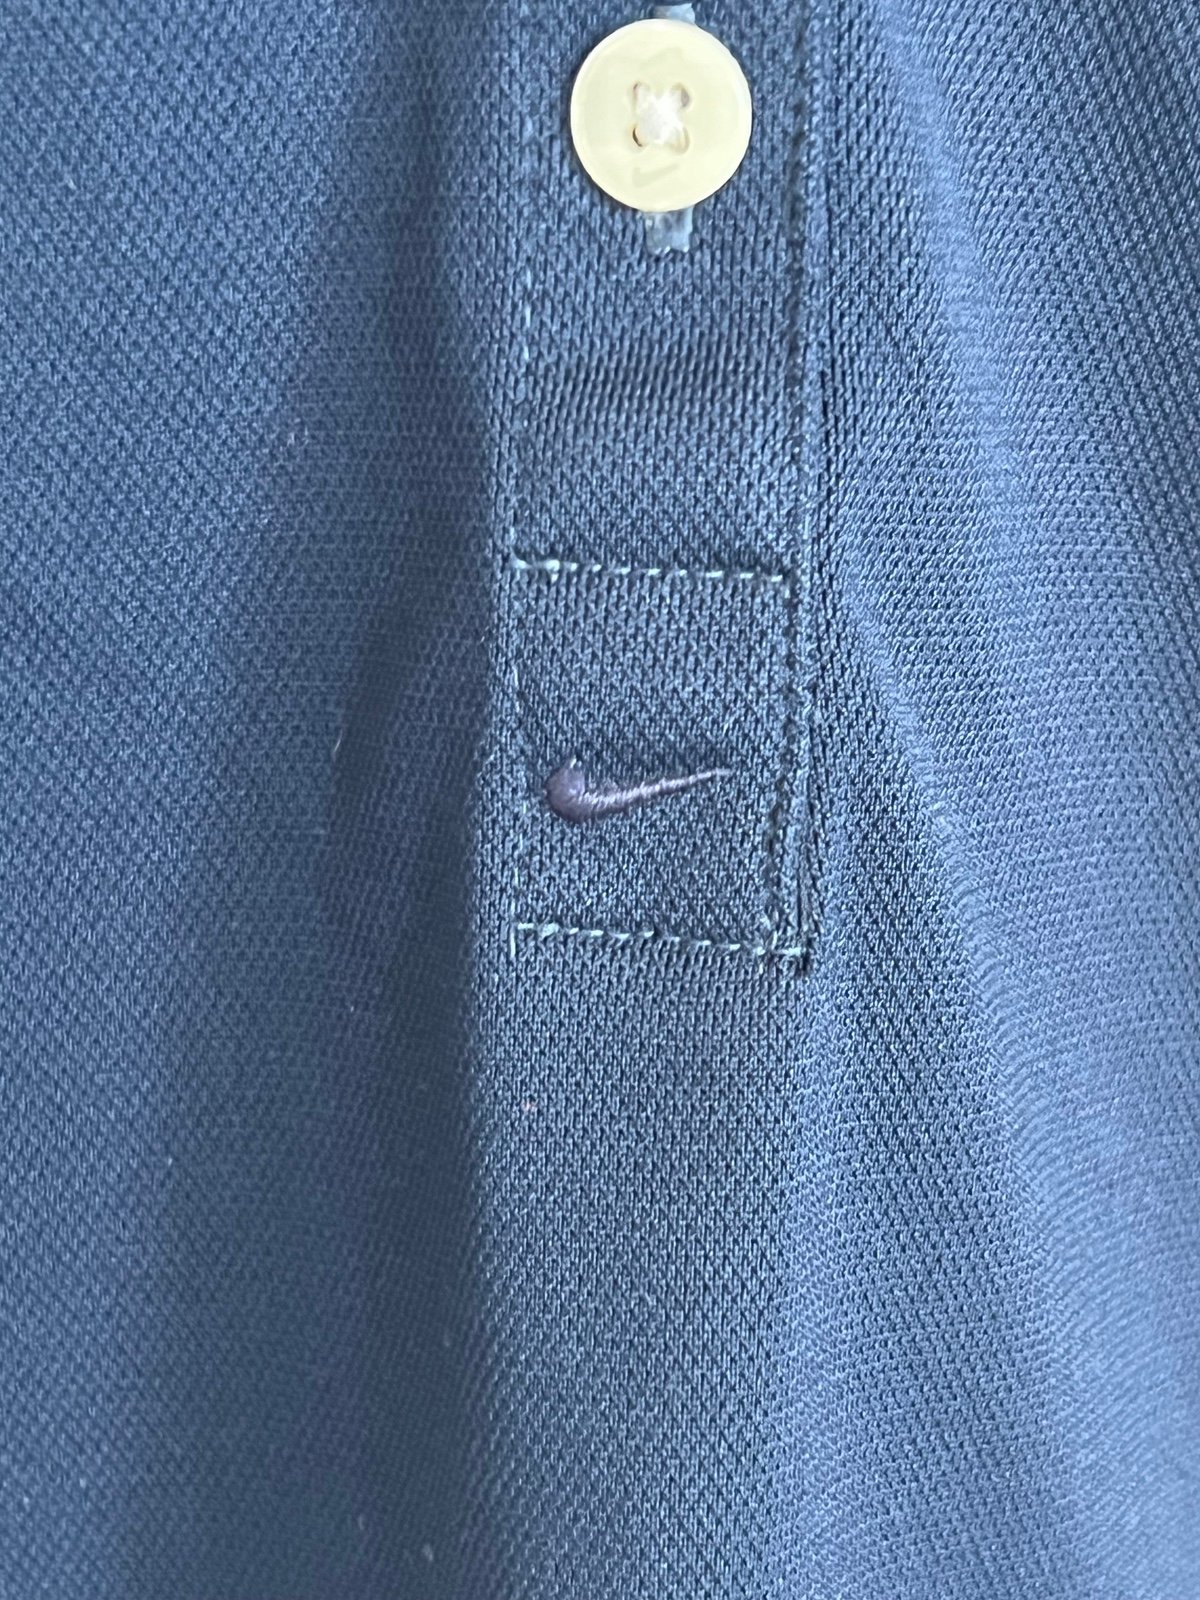 the Lowest price Nike Dri-Fit Women´s Short Sleeve Golf Polo Shirt Solid Blue Size XL lSdqgPbW0 Factory Price